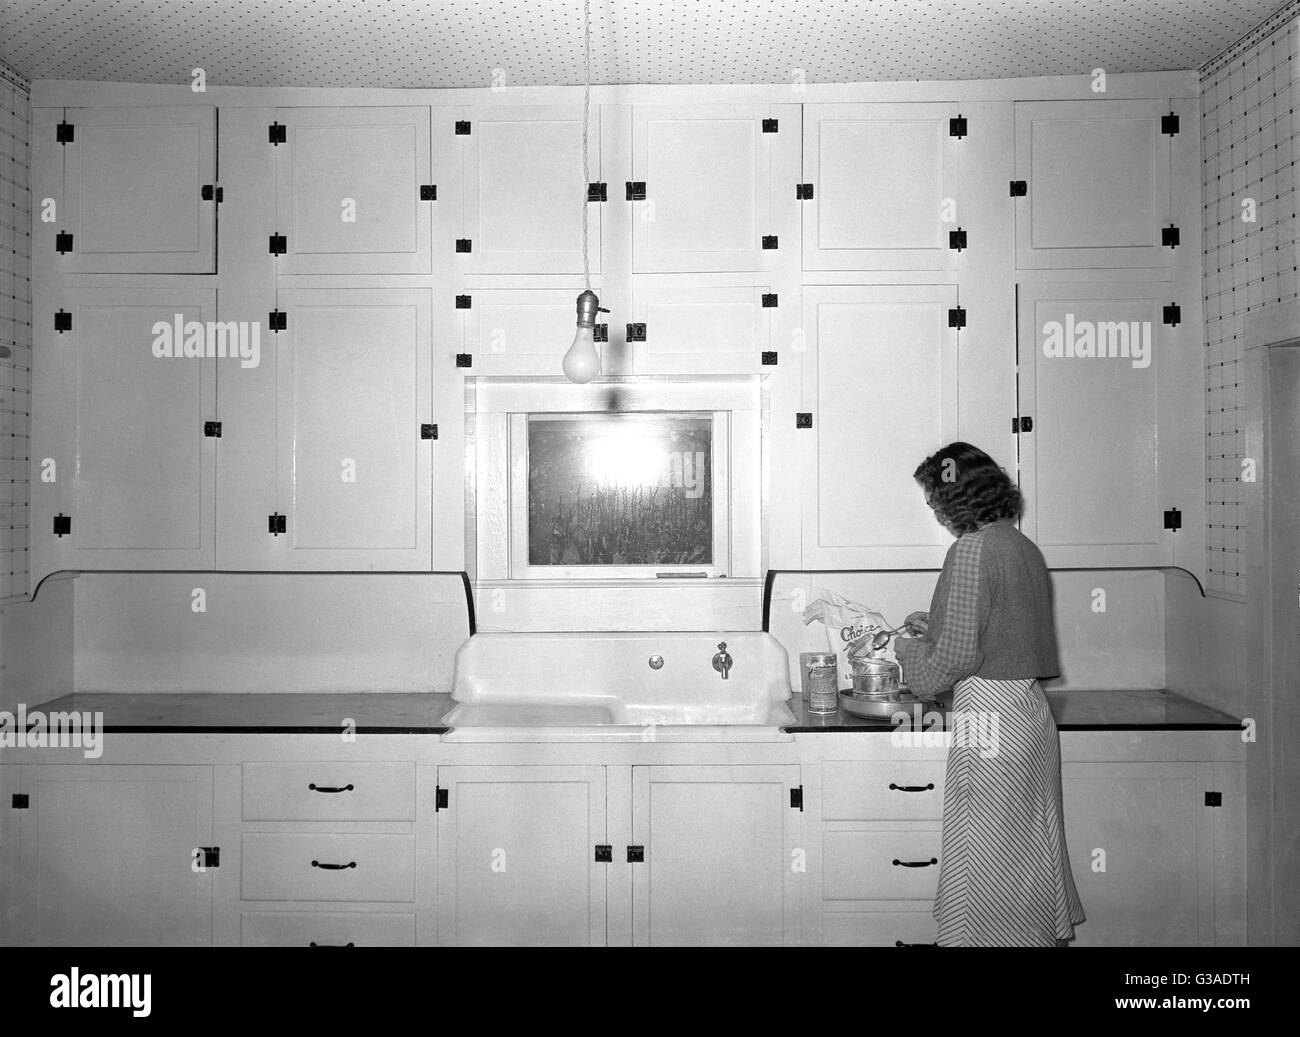 Kitchen of tenant purchase client. Hidalgo County, Texas. Date 1939 Feb. Stock Photo